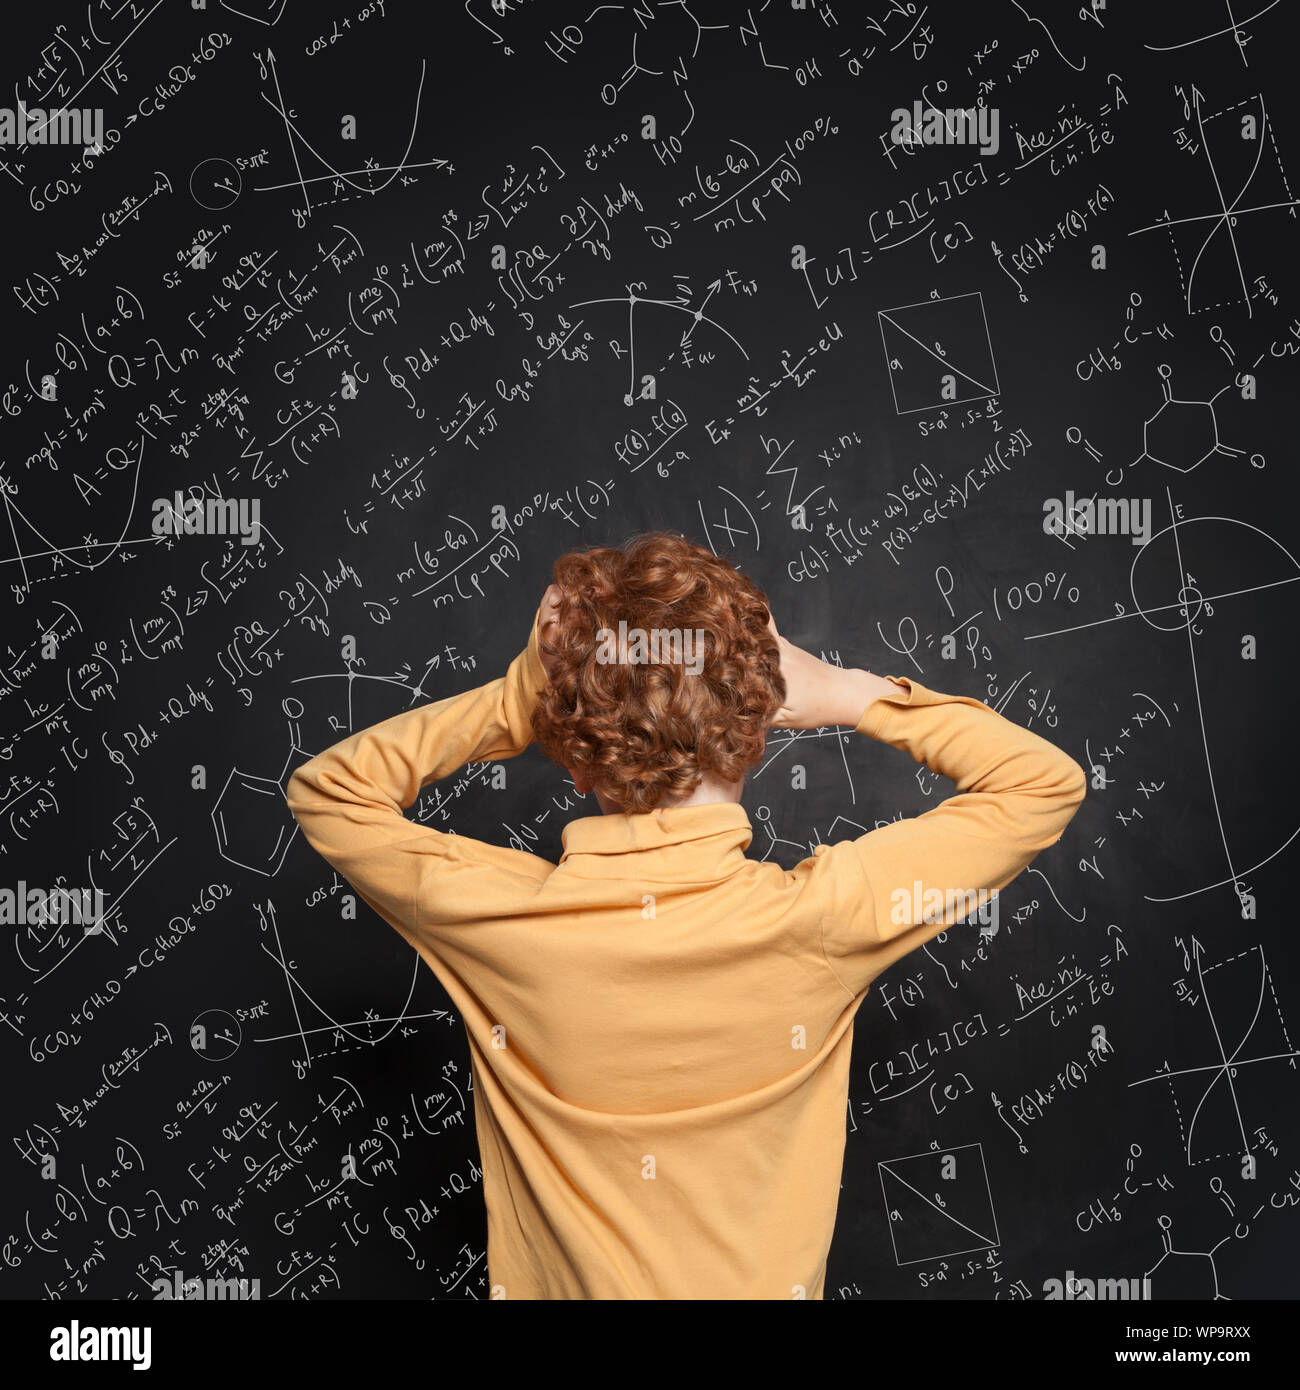 Afraid child against blackboard background with science and maths formulas Stock Photo